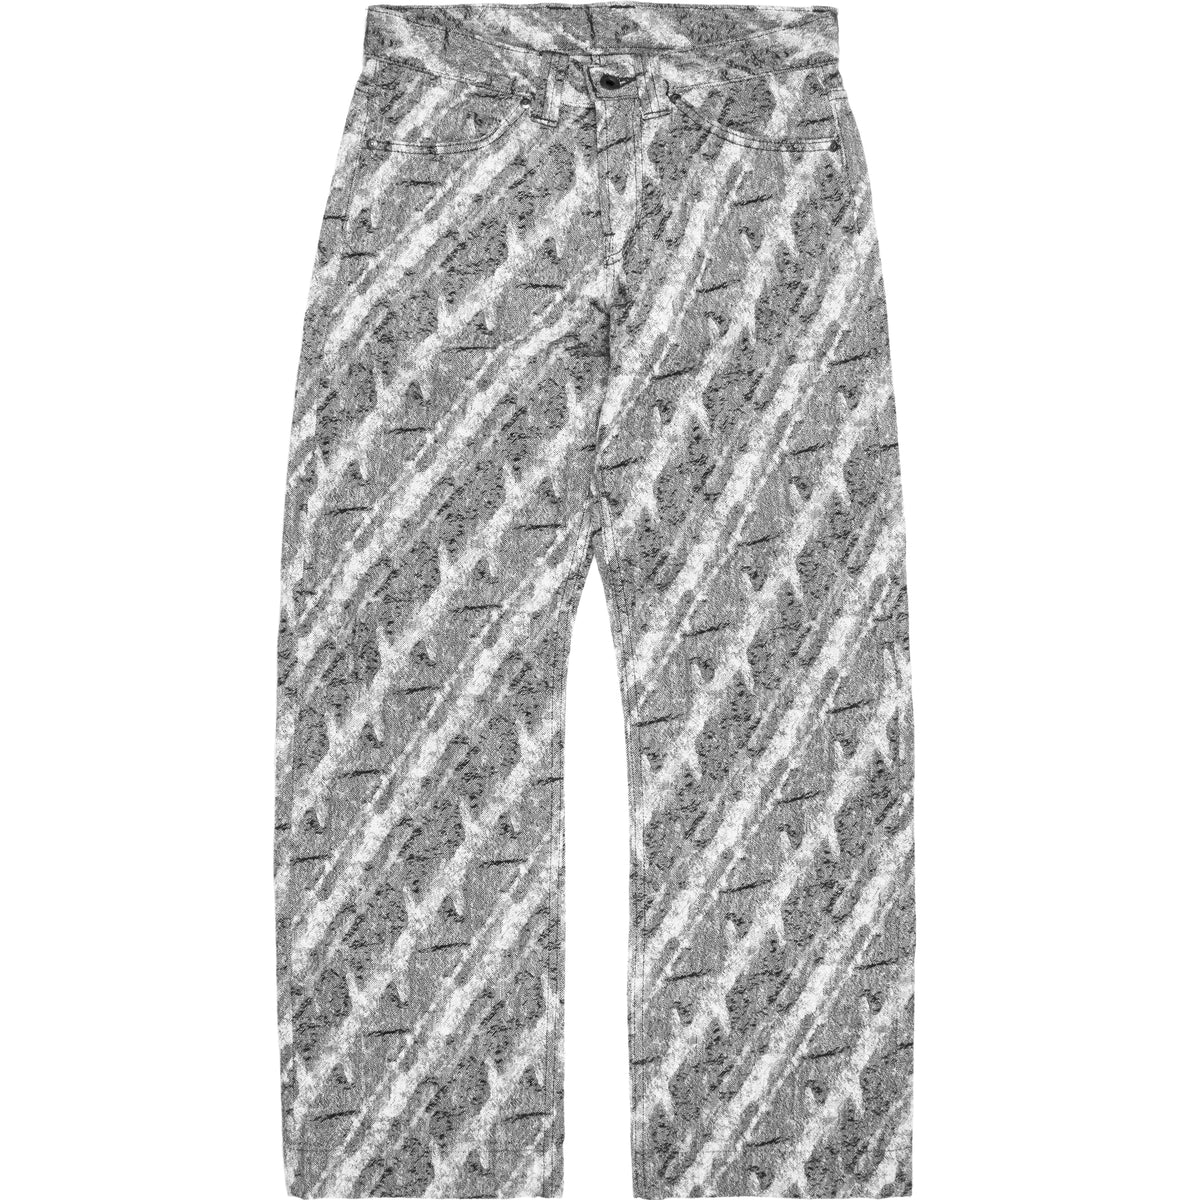 Issey Miyake APOC Knitted Jean – SILVER LEAGUE